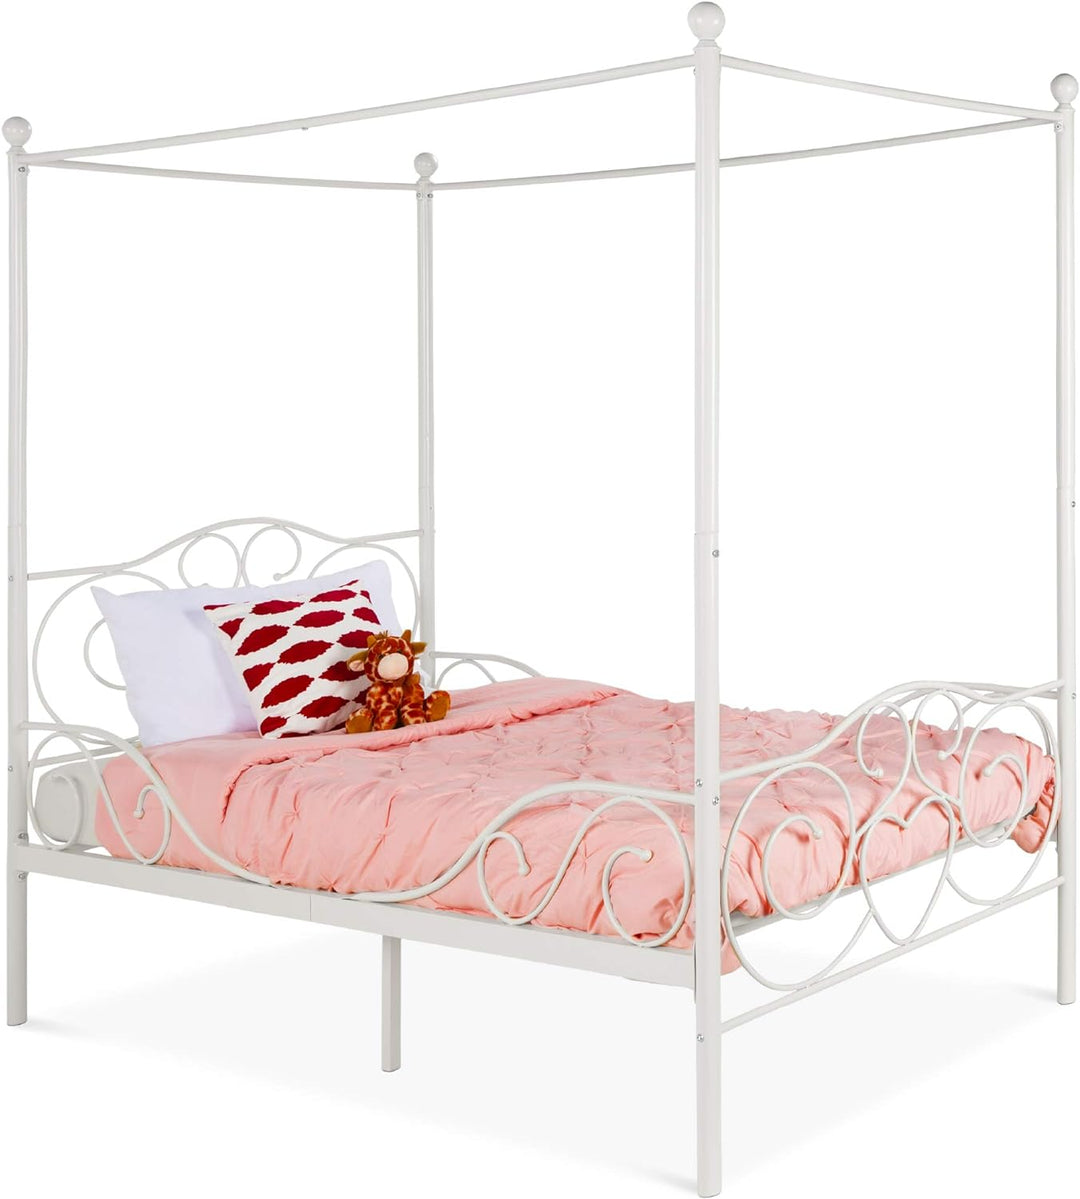 Best Choice Products 4-Post Metal Canopy Twin Bed Frame for Kids Bedroom, Guest Room W/Heart Scroll Design, 14-Slat Support System, Headboard, Footboard - White